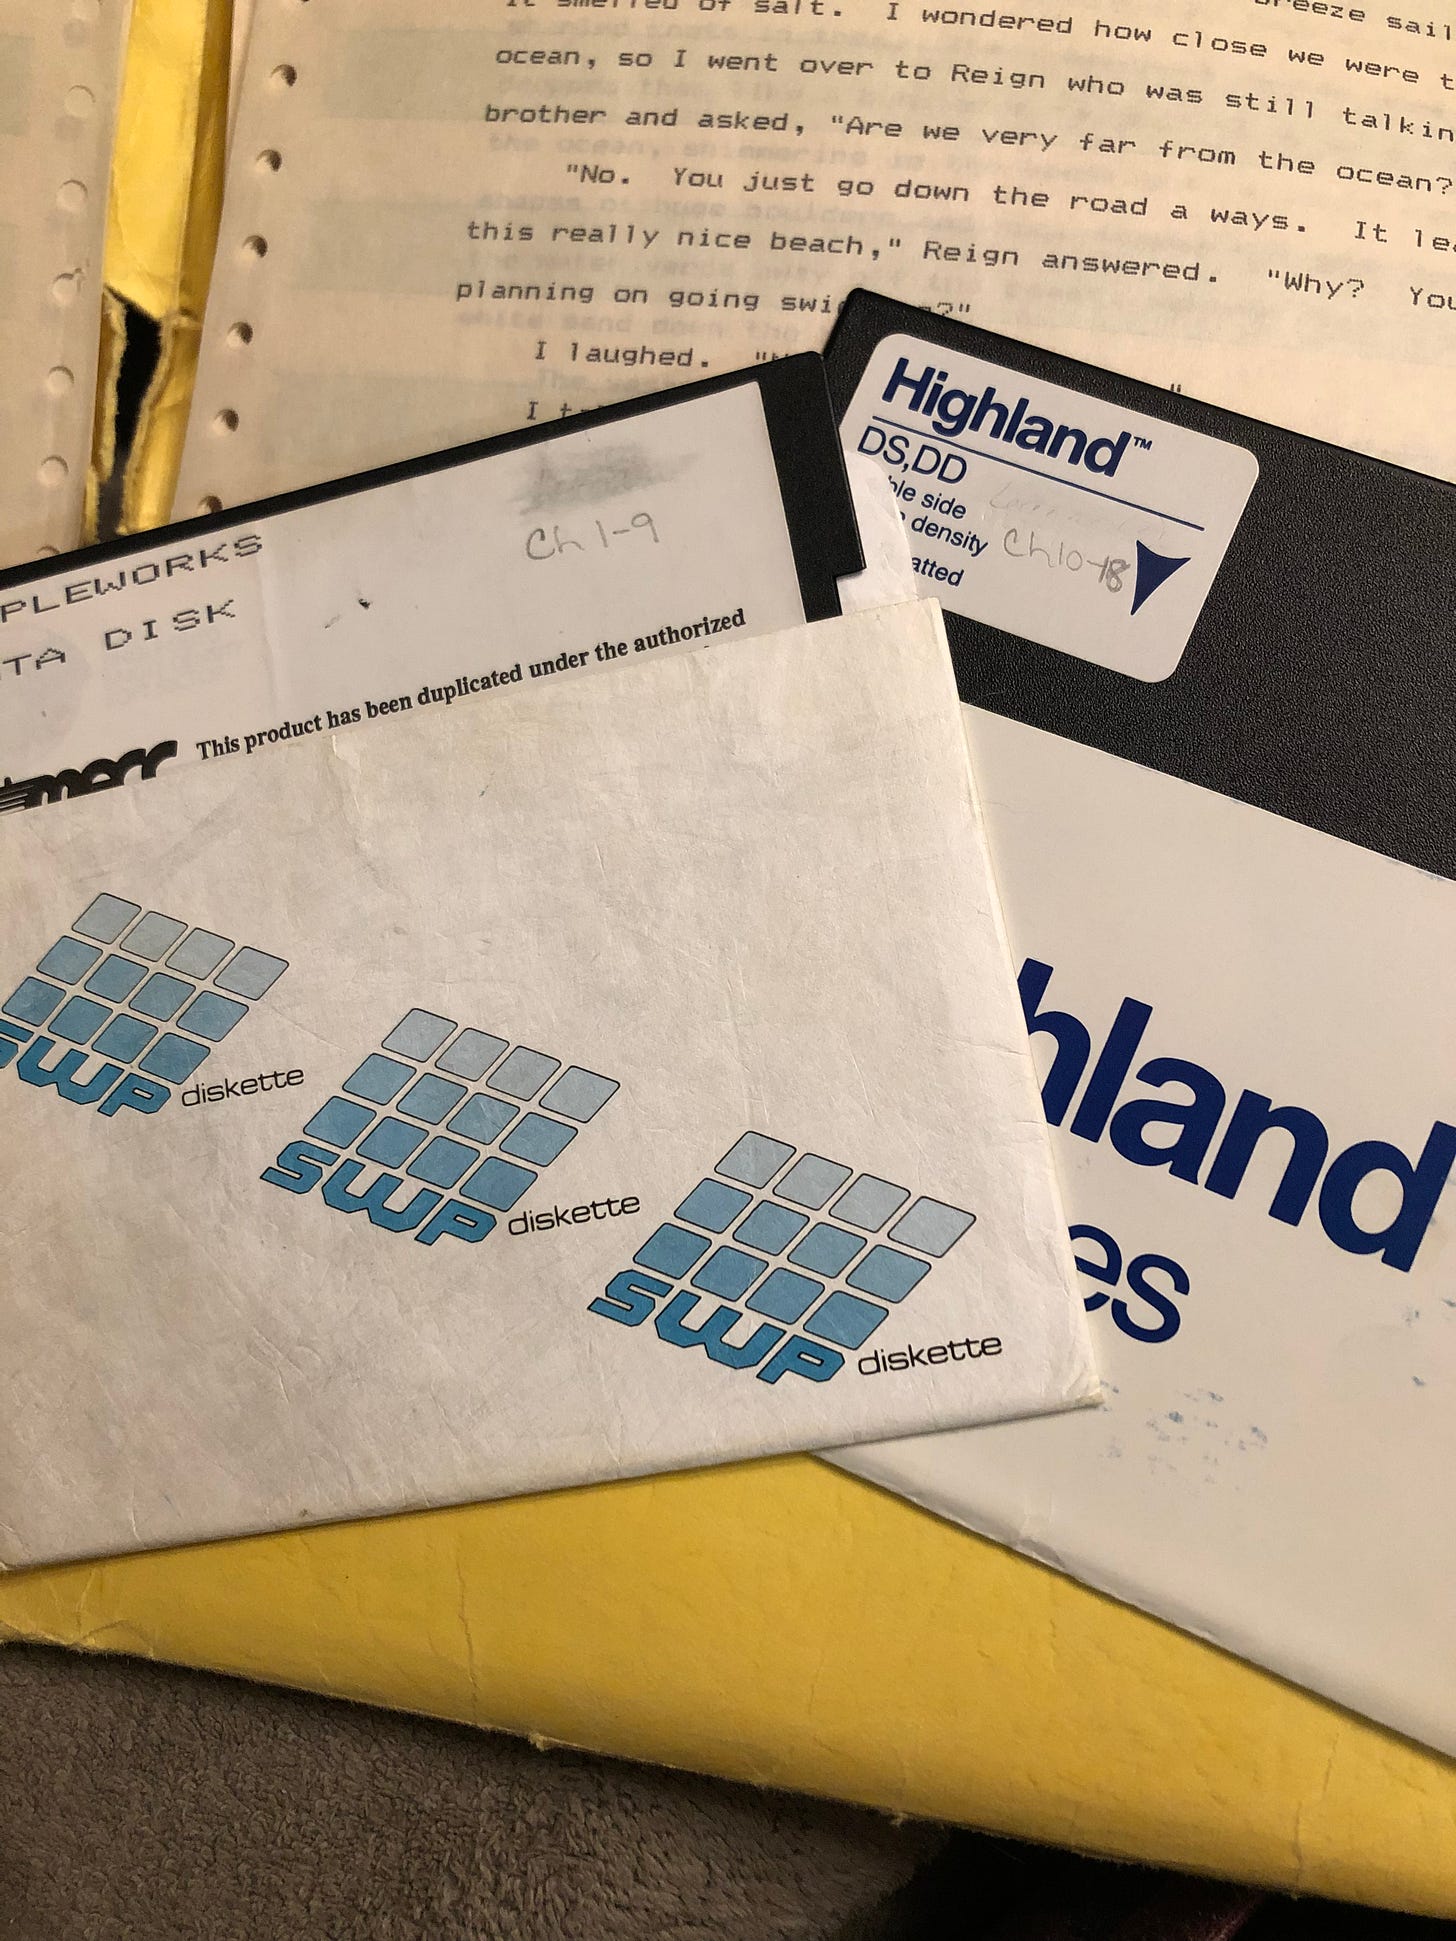 The floppy disks and a page of the printout on the yellow folder.